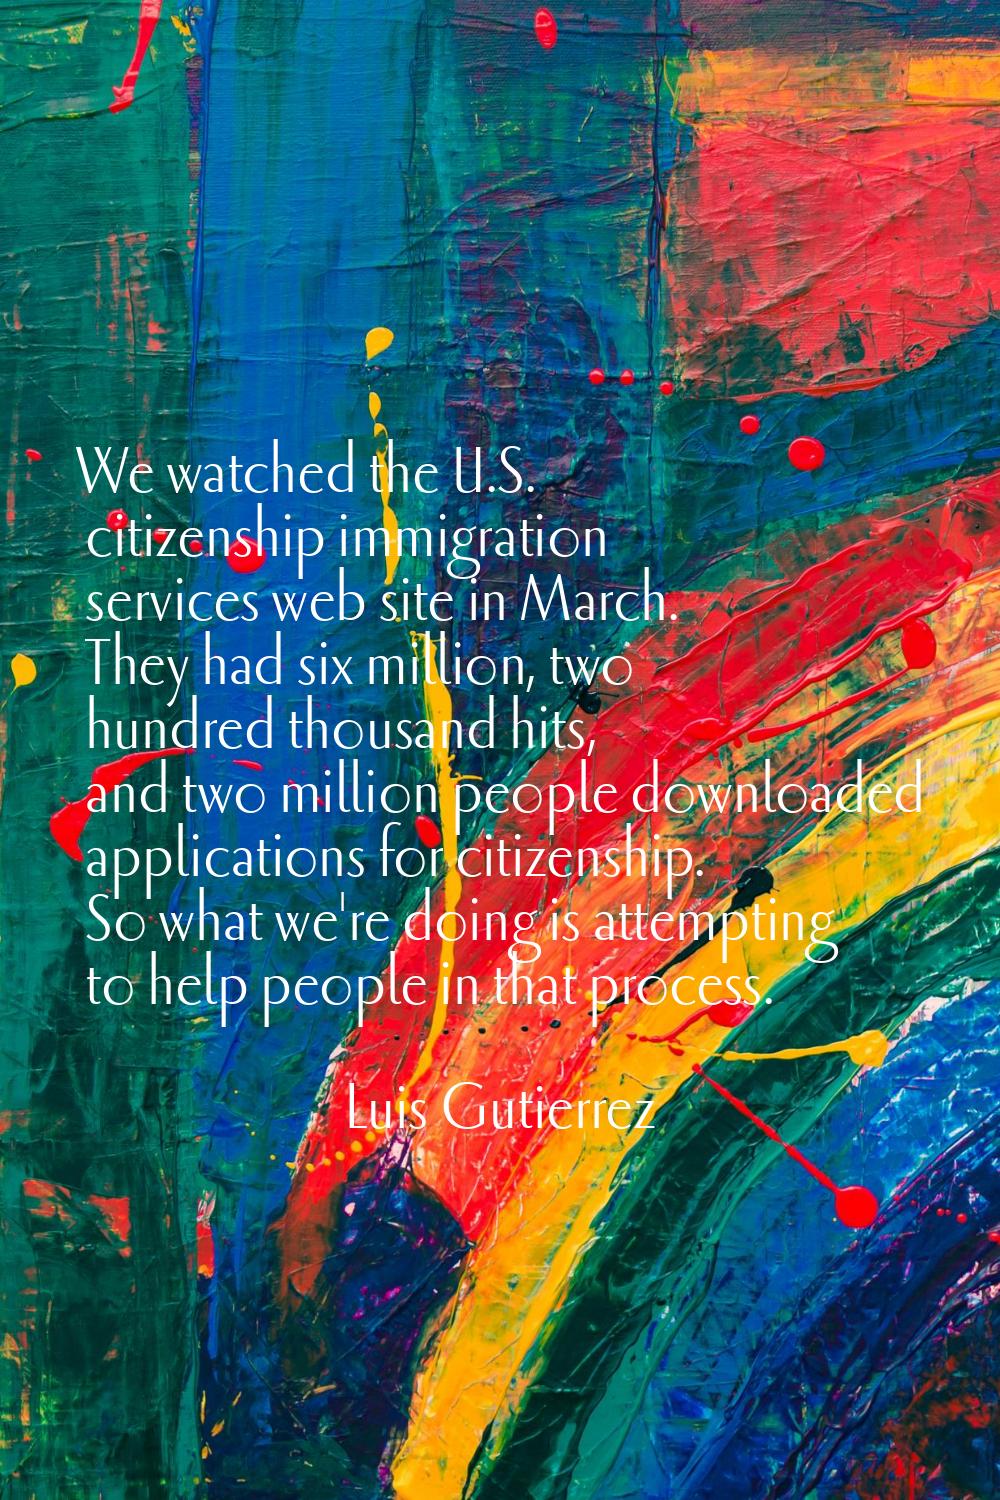 We watched the U.S. citizenship immigration services web site in March. They had six million, two h